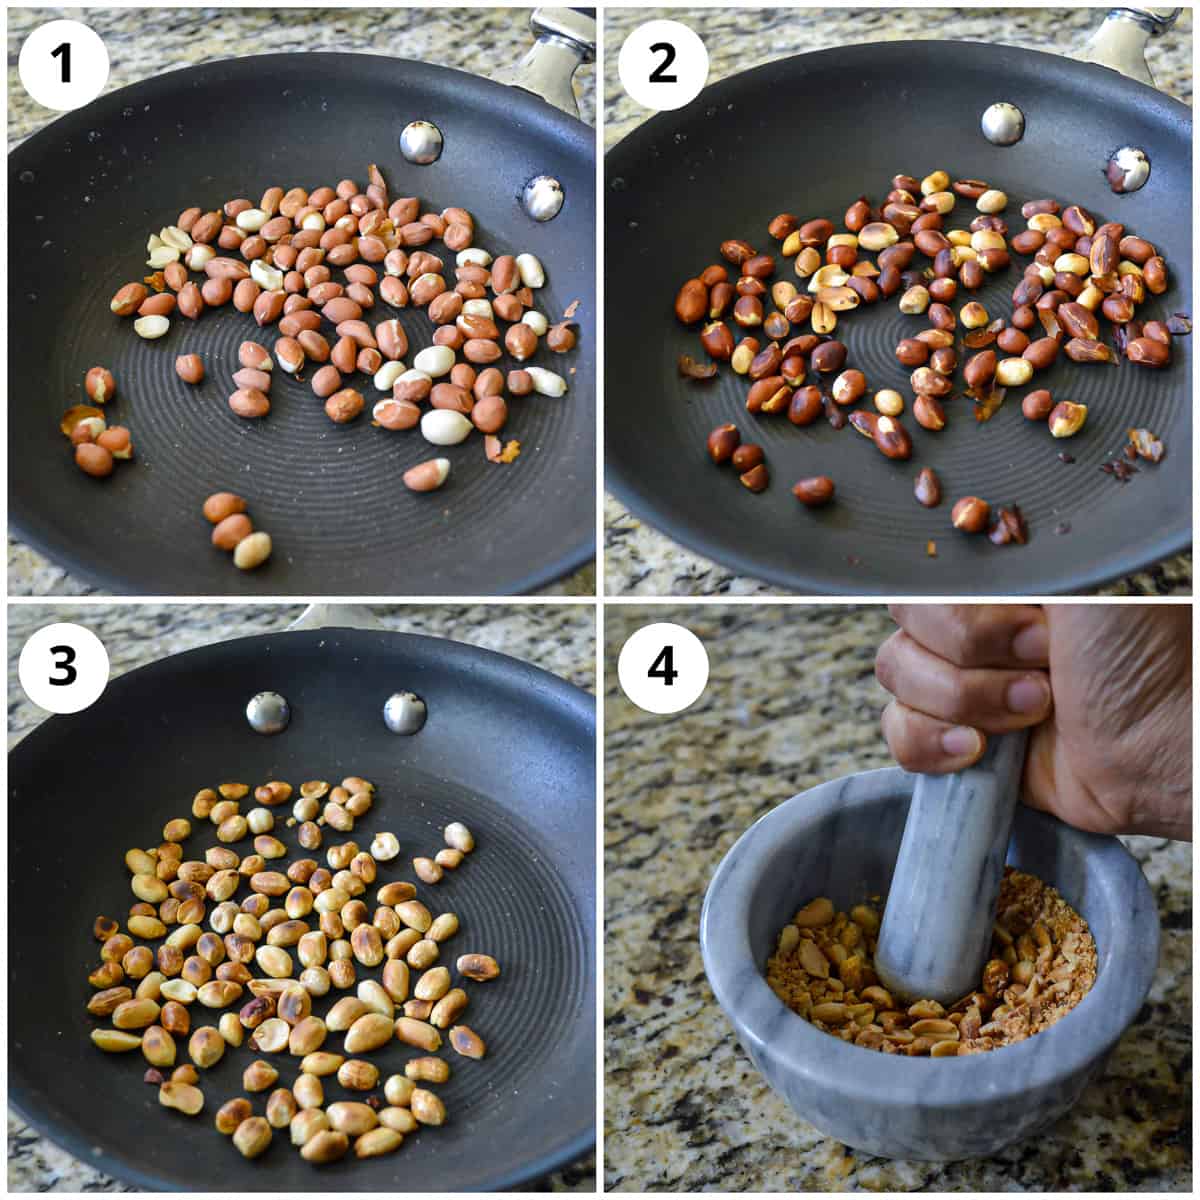 Roasting and grinding the peanuts